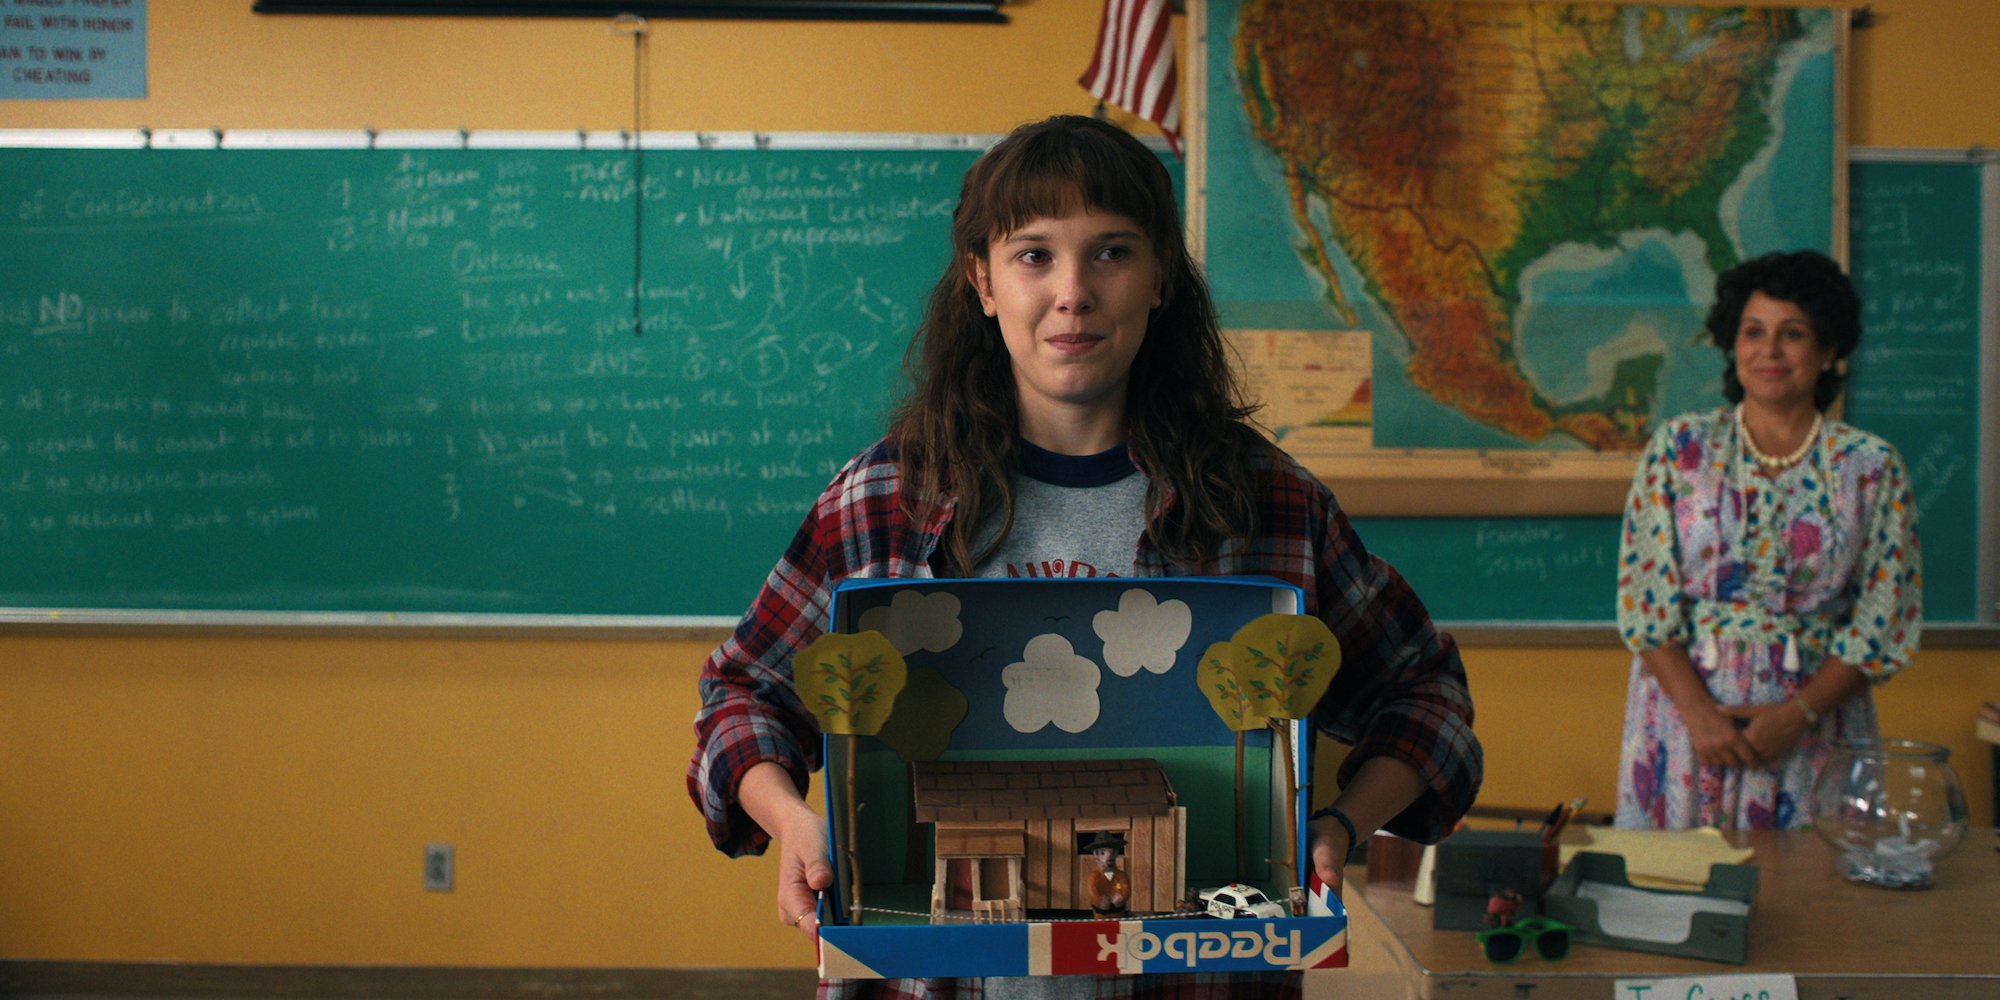 Millie Bobby Brown as Eleven holding a diorama in class.